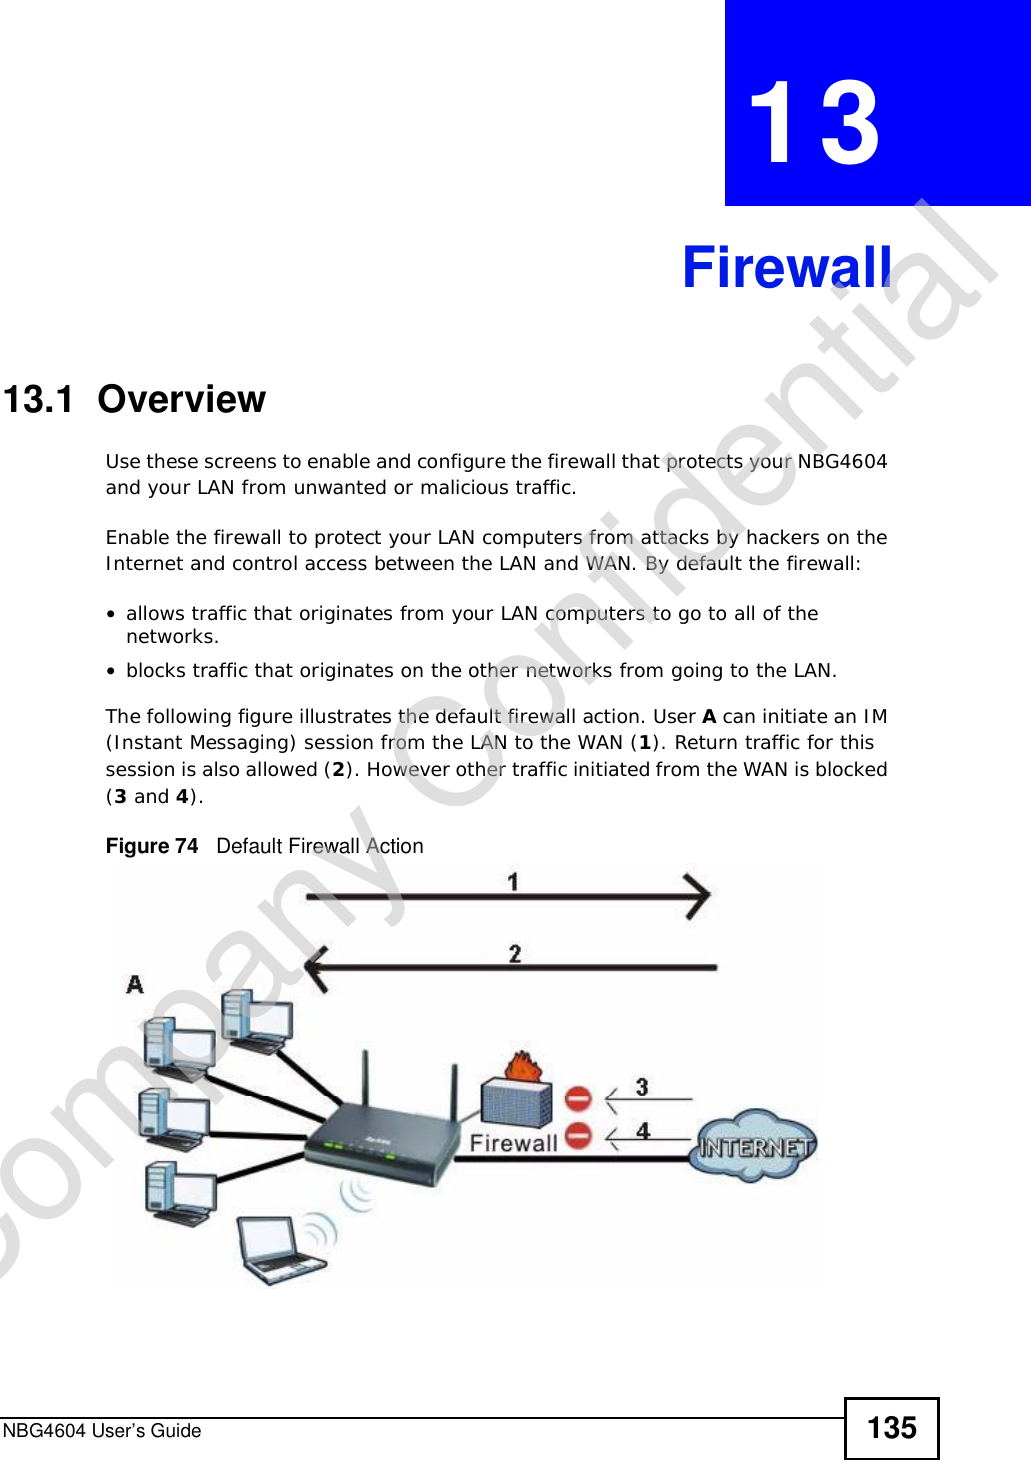 NBG4604 User’s Guide 135CHAPTER 13Firewall13.1  OverviewUse these screens to enable and configure the firewall that protects your NBG4604 and your LAN from unwanted or malicious traffic.Enable the firewall to protect your LAN computers from attacks by hackers on the Internet and control access between the LAN and WAN. By default the firewall:•allows traffic that originates from your LAN computers to go to all of the networks. •blocks traffic that originates on the other networks from going to the LAN. The following figure illustrates the default firewall action. User A can initiate an IM (Instant Messaging) session from the LAN to the WAN (1). Return traffic for this session is also allowed (2). However other traffic initiated from the WAN is blocked (3 and 4).Figure 74   Default Firewall ActionCompany Confidential